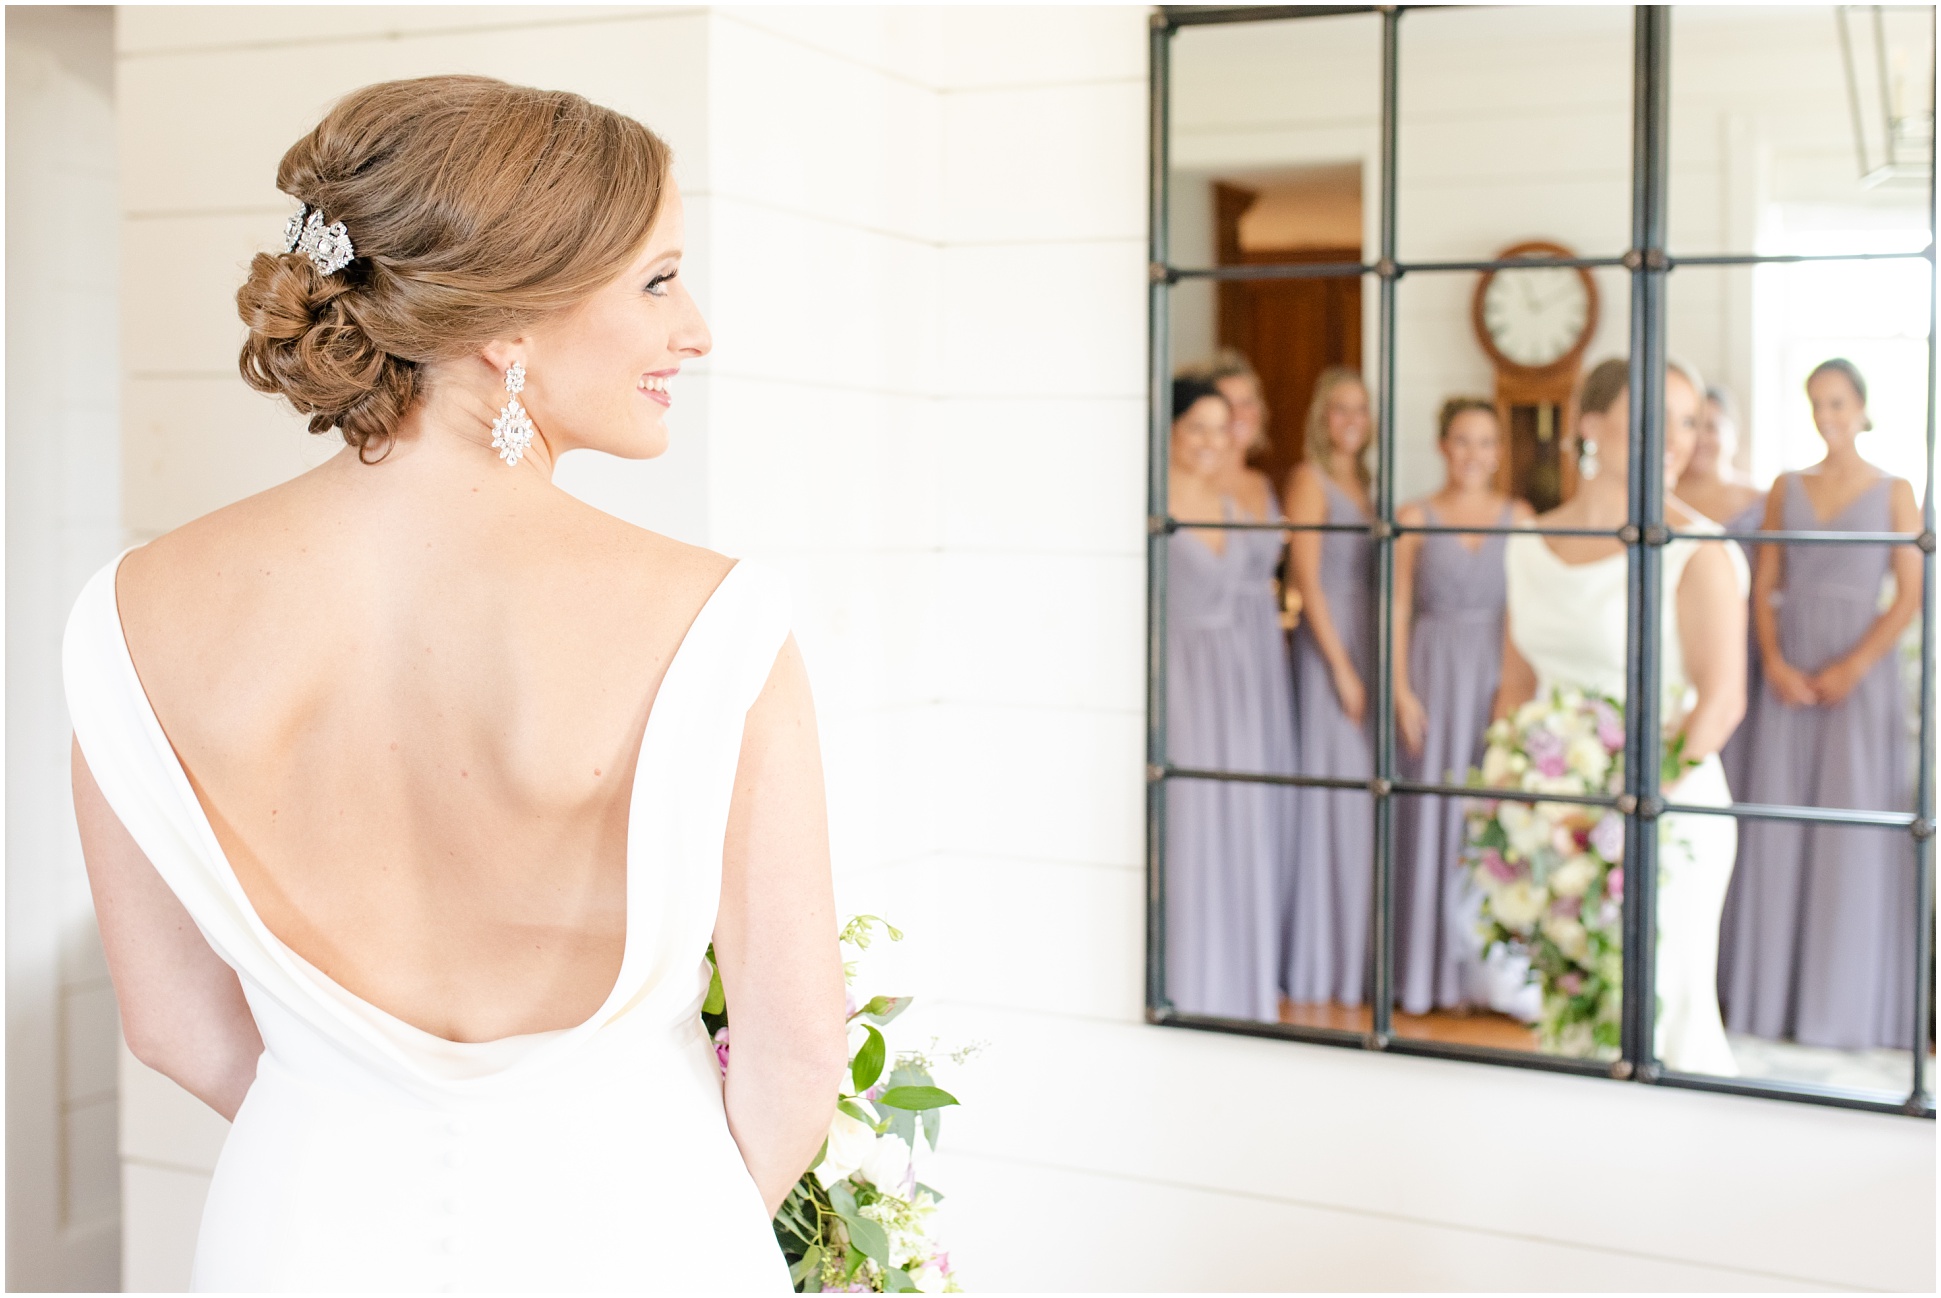 Bride wearing an open back dress, looking over her shoulder while her bridal party is looking at her through the mirror